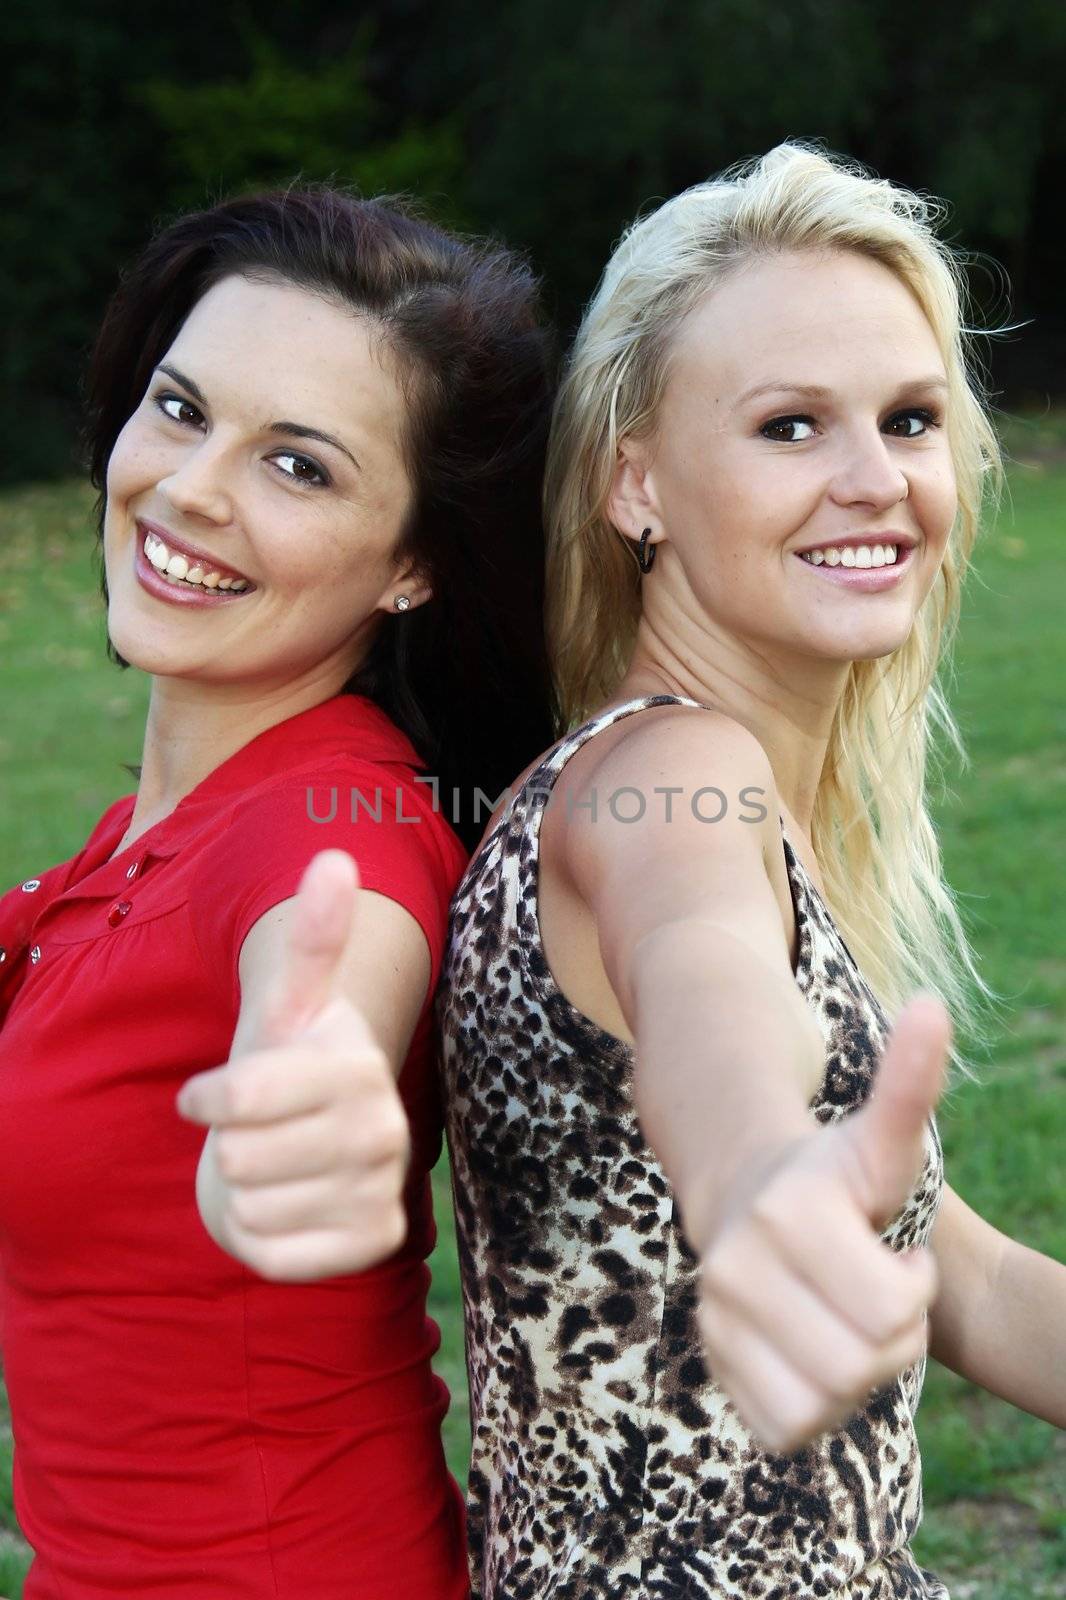 Gorgeous Women Showing Thumbs Up by fouroaks